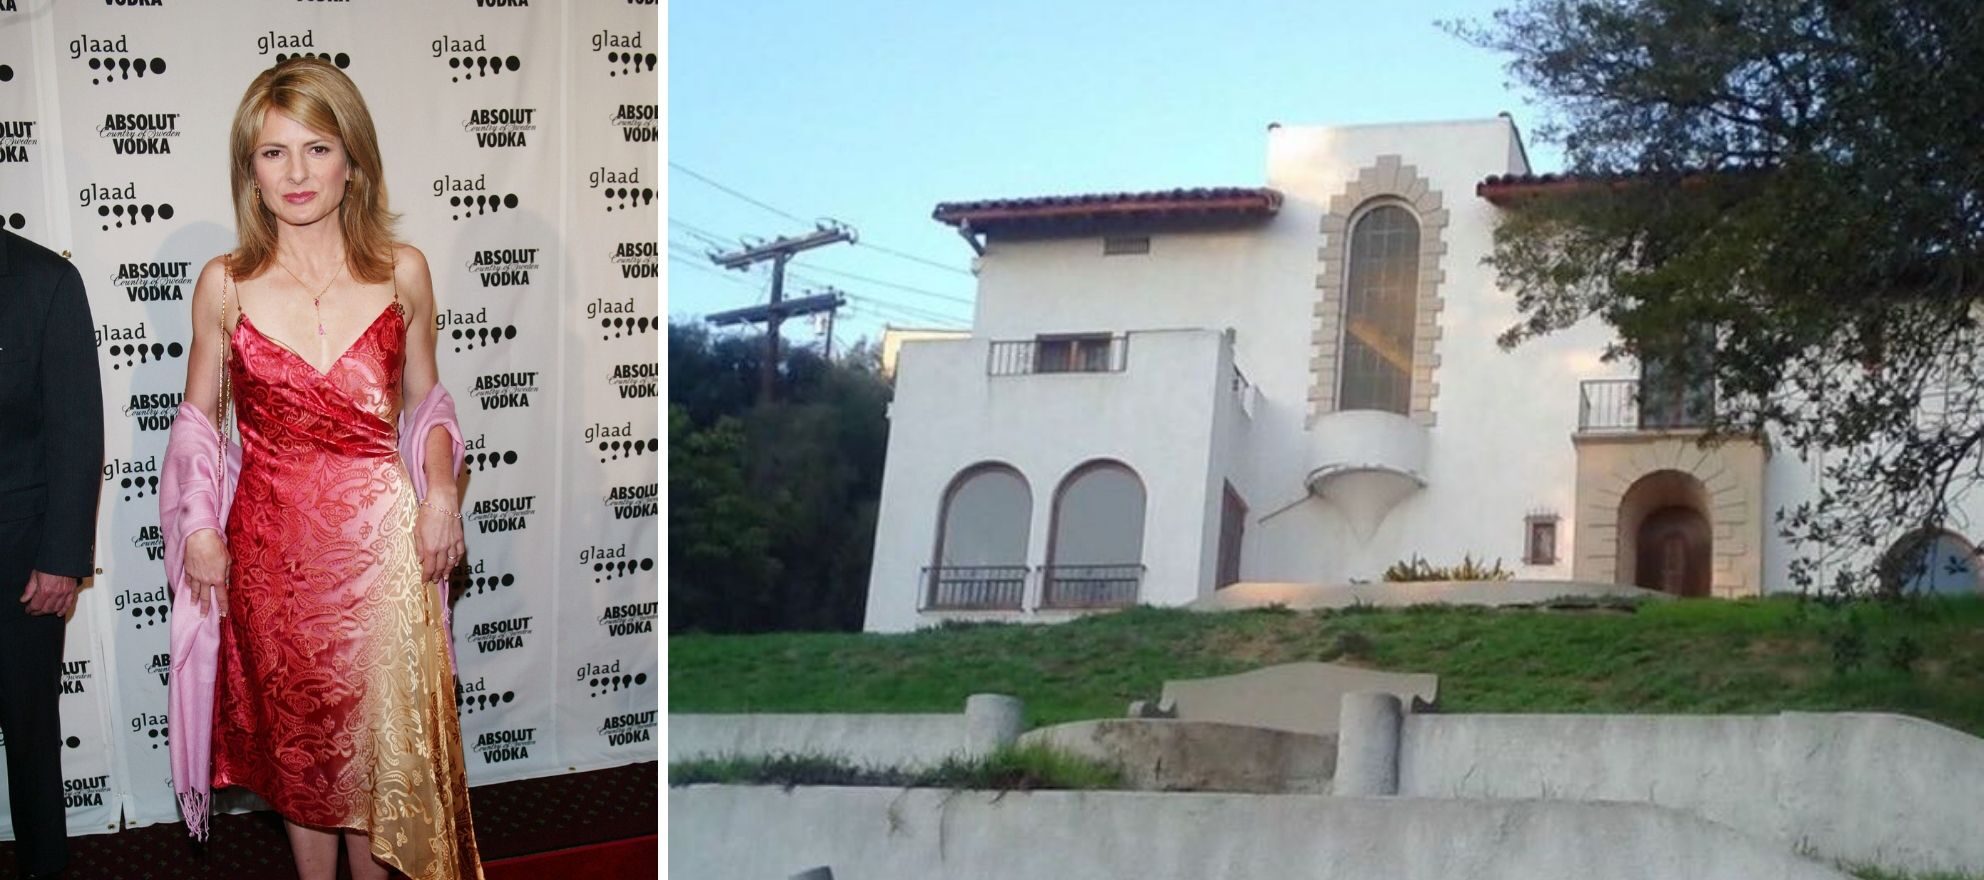 Famous California 'Murder Mansion' hits the market for $3.5M